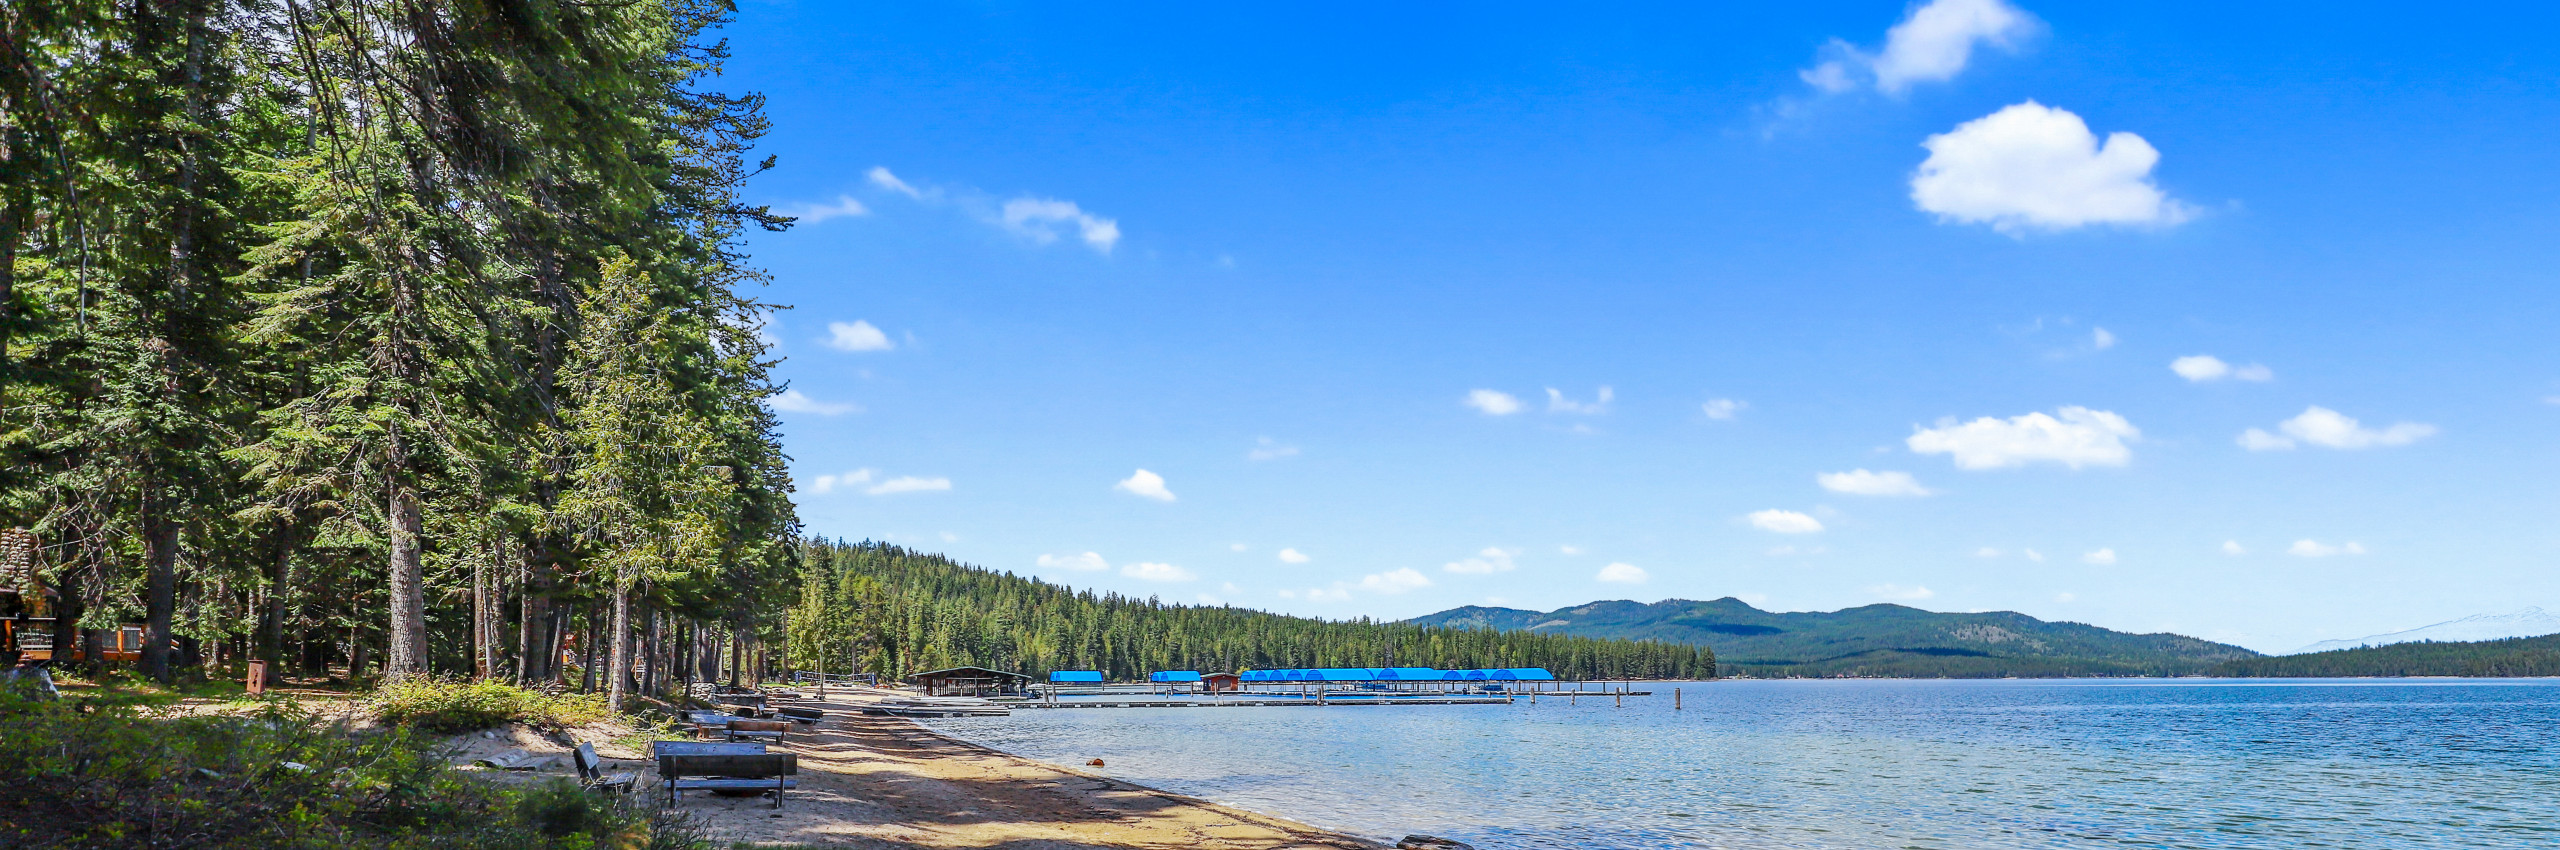 A summer day on the beach at Hill’s Resort on Priest Lake.